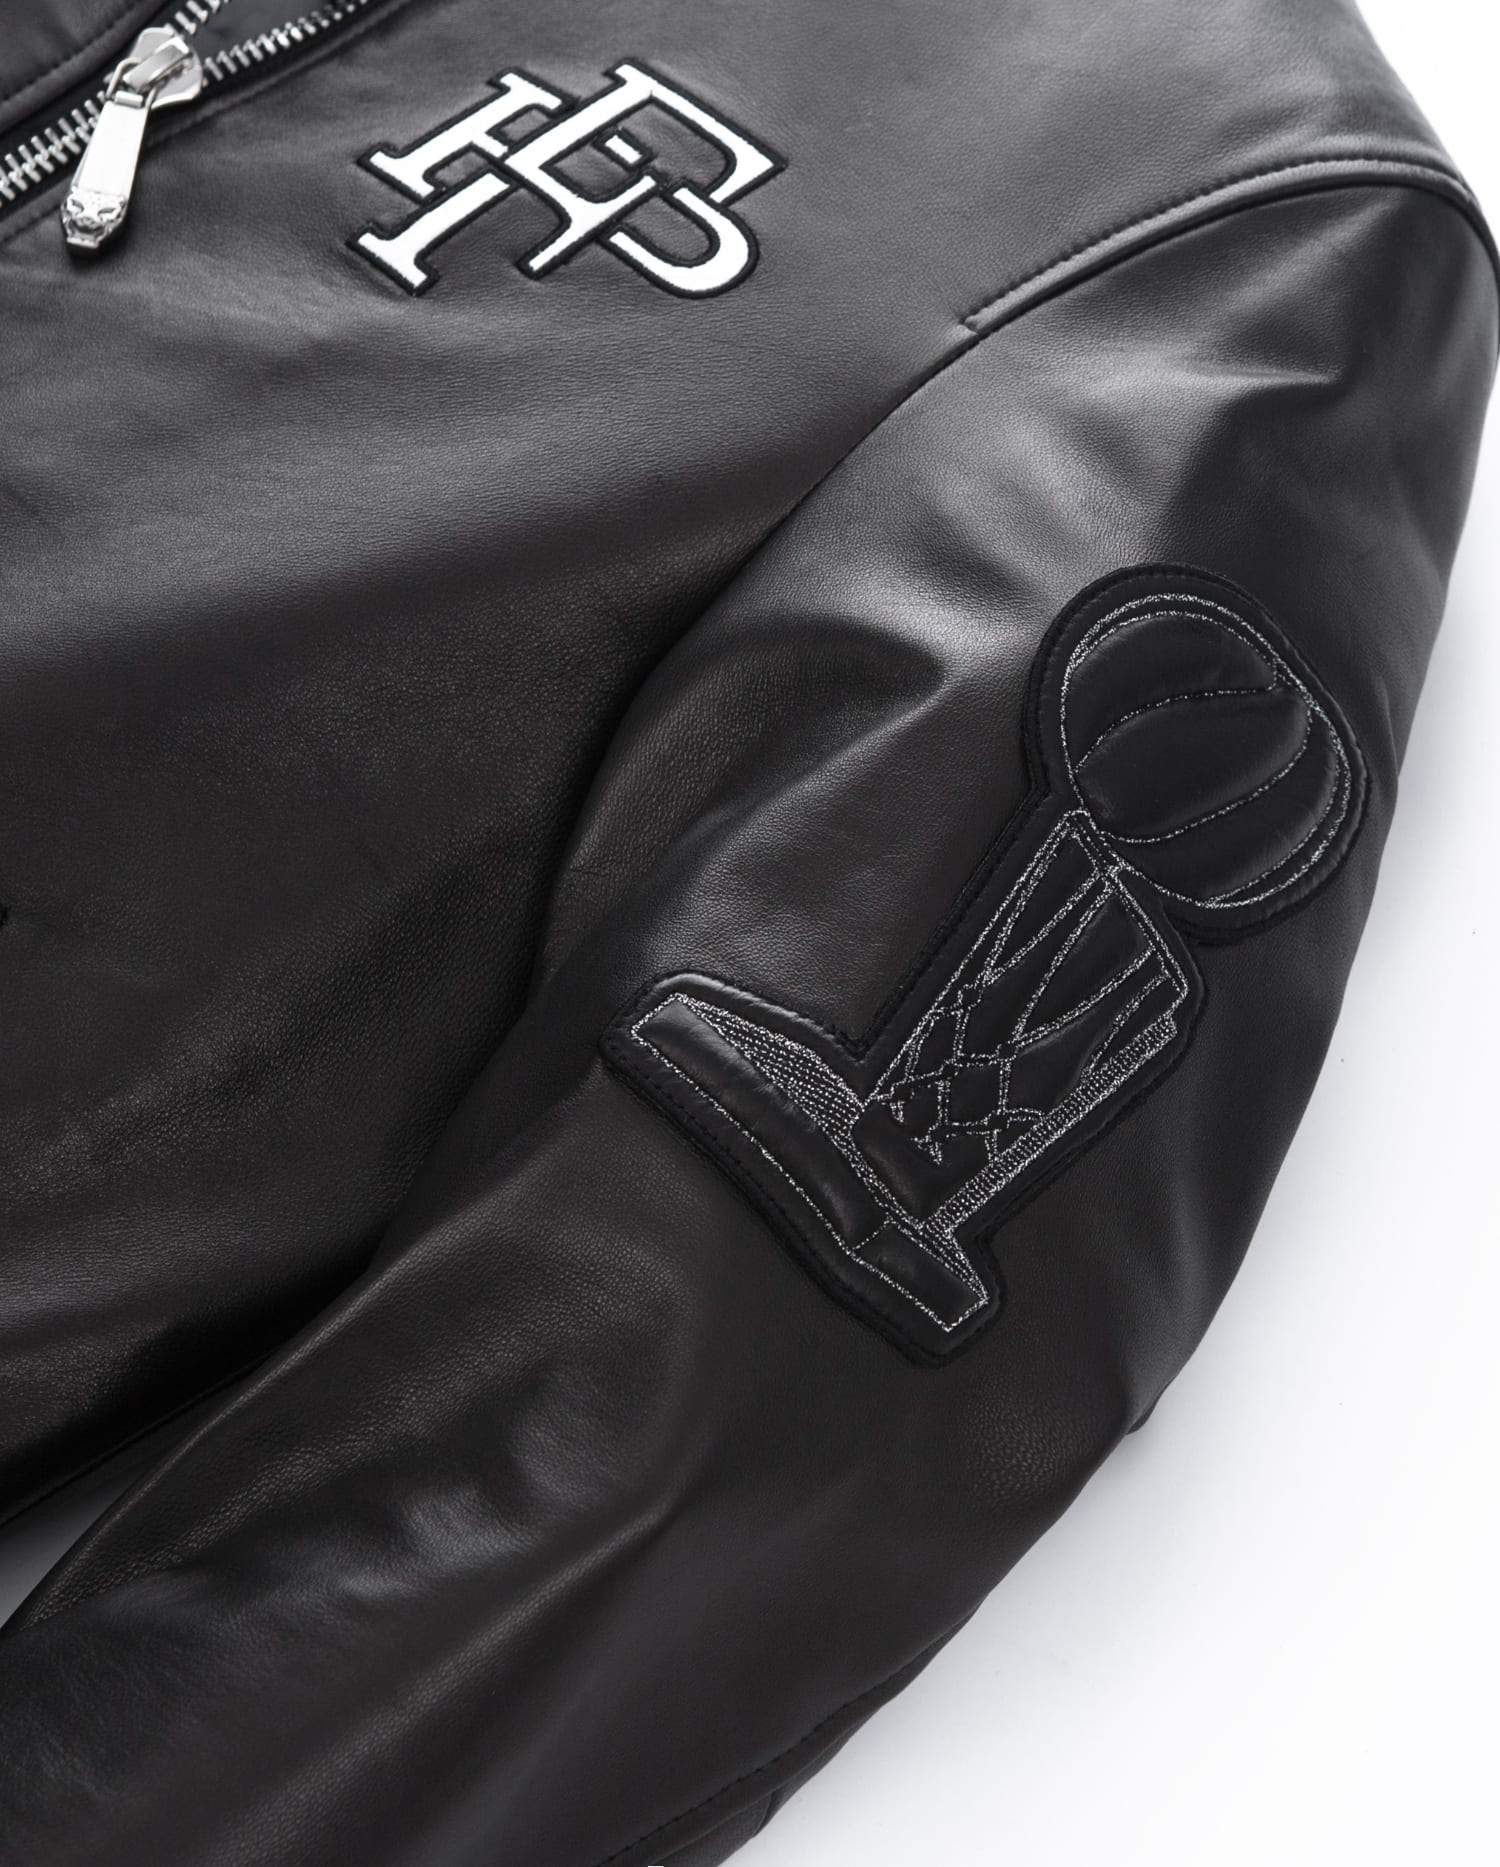 Black Embroidery Patches Varsity Letterman Bomber Leather Jacket